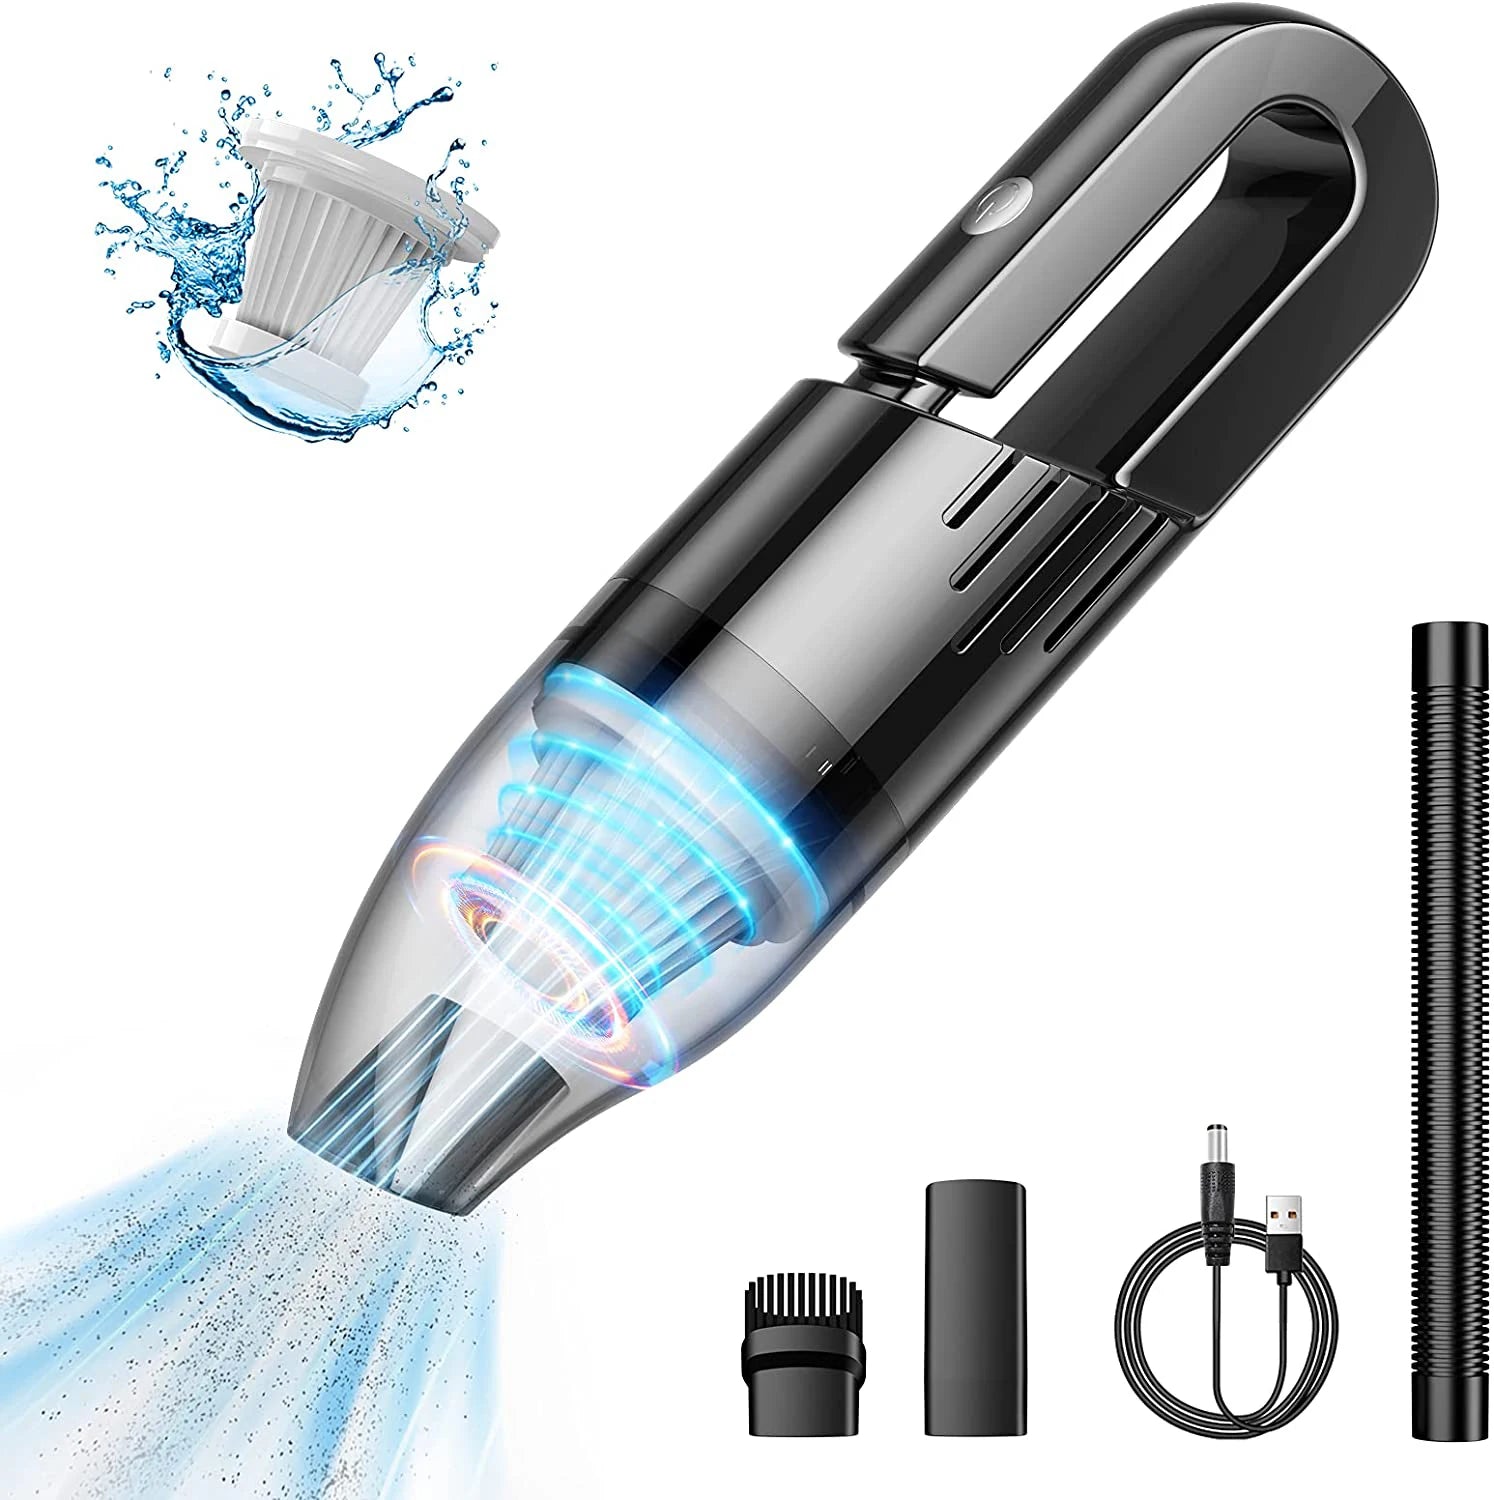 Handheld Vacuum Cleaner Rechargeable for Car Home Office Use Pet Hair Carpet Cleaner Cachine Super Suction Cordless Vacuum